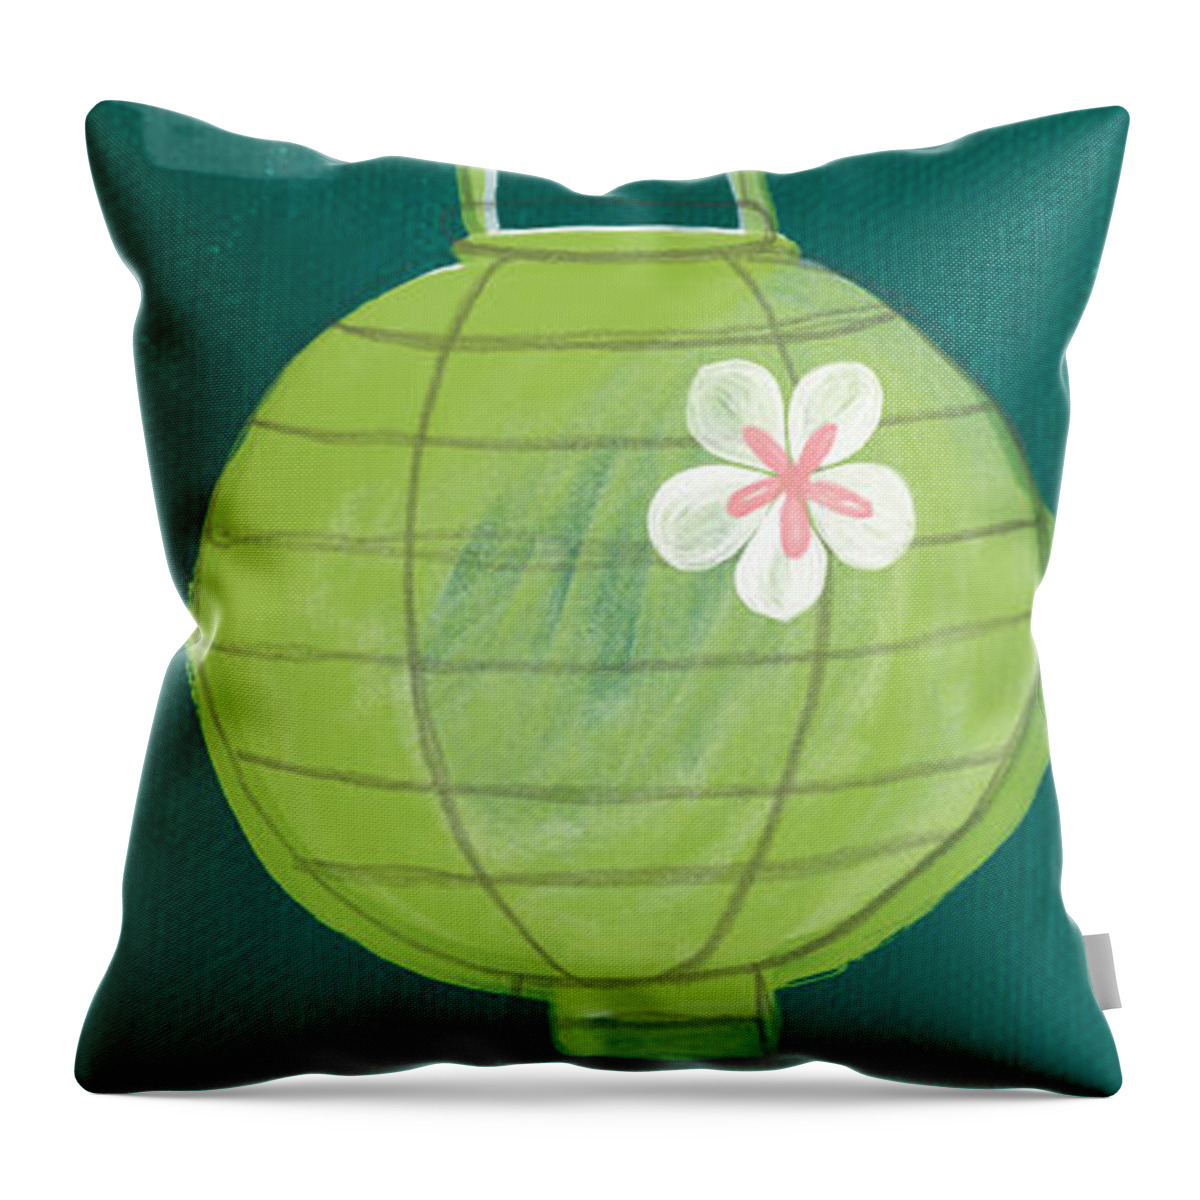 Balance Throw Pillow featuring the painting Green Lantern by Linda Woods